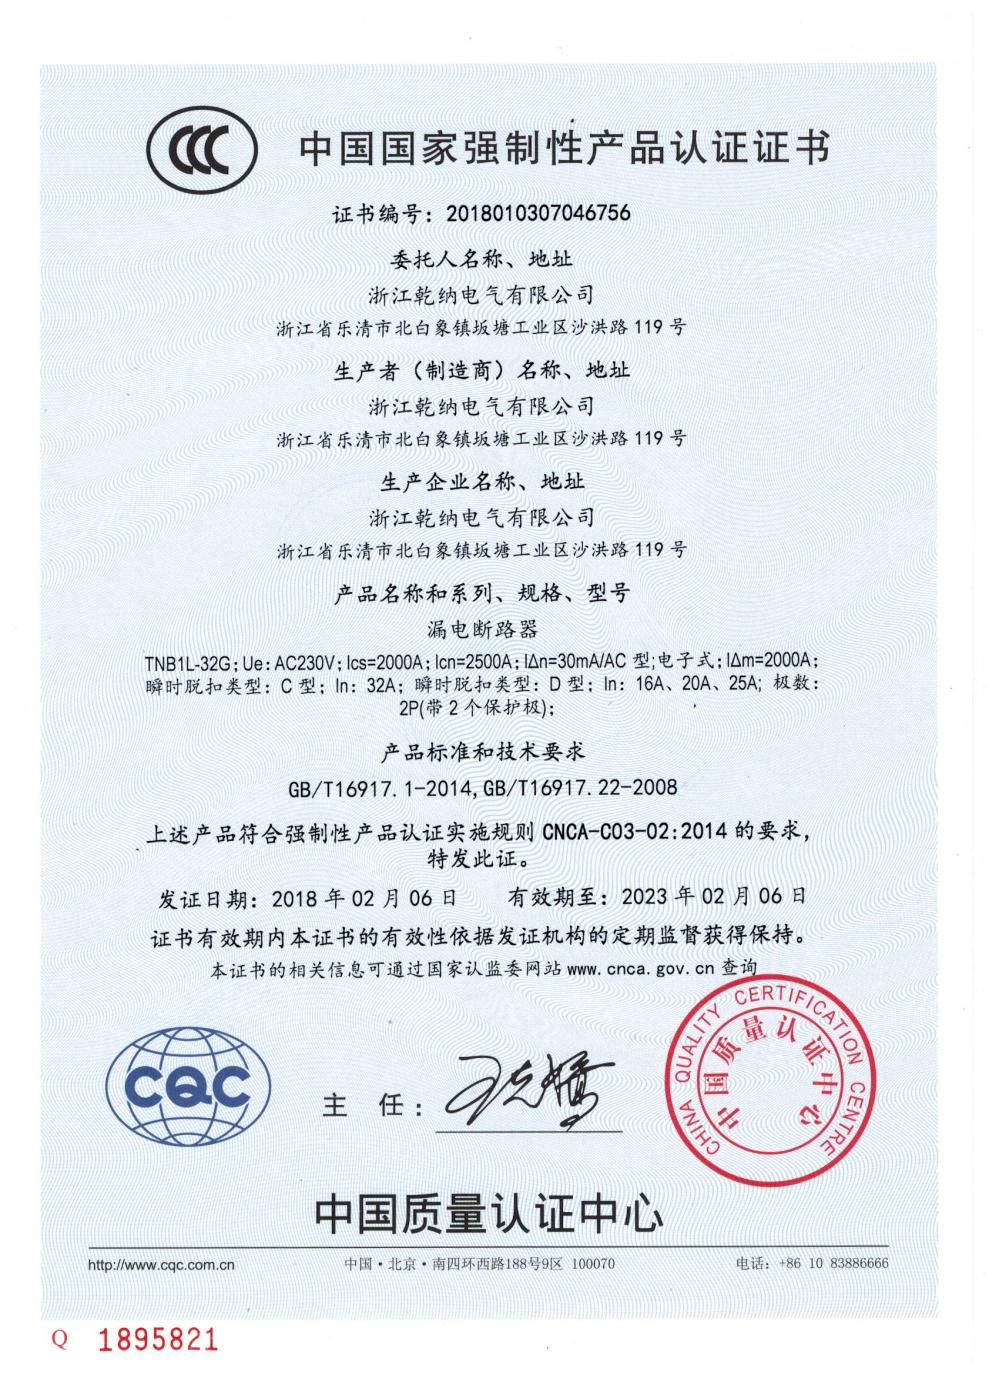 CERTIFICATE FOR CHINA COMPULSORY PRODUCTION CERTIFICATION